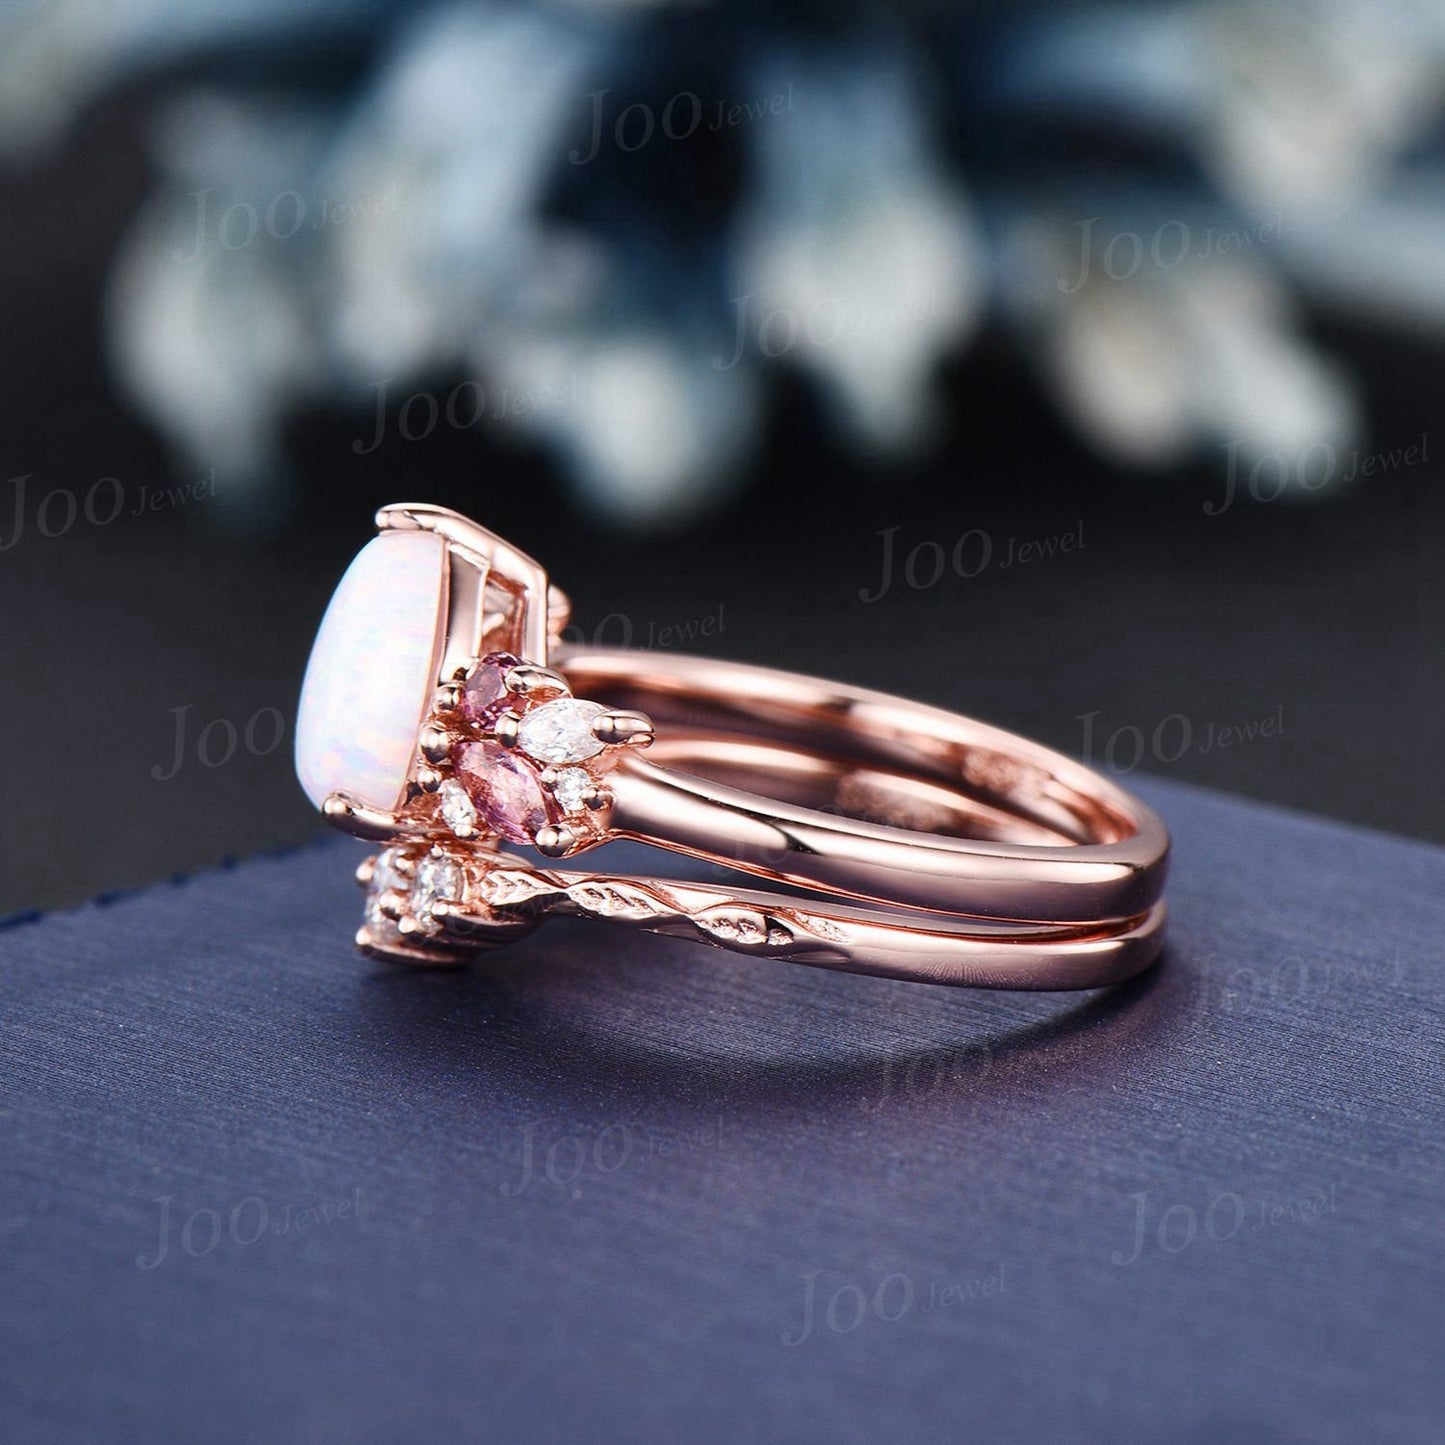 Pink Tourmaline Opal Cluster Bridal Set 1.25ct Pear Opal Engagement Ring Set Vine Twig Moissanite Band Promise Ring October Birthstone Gifts